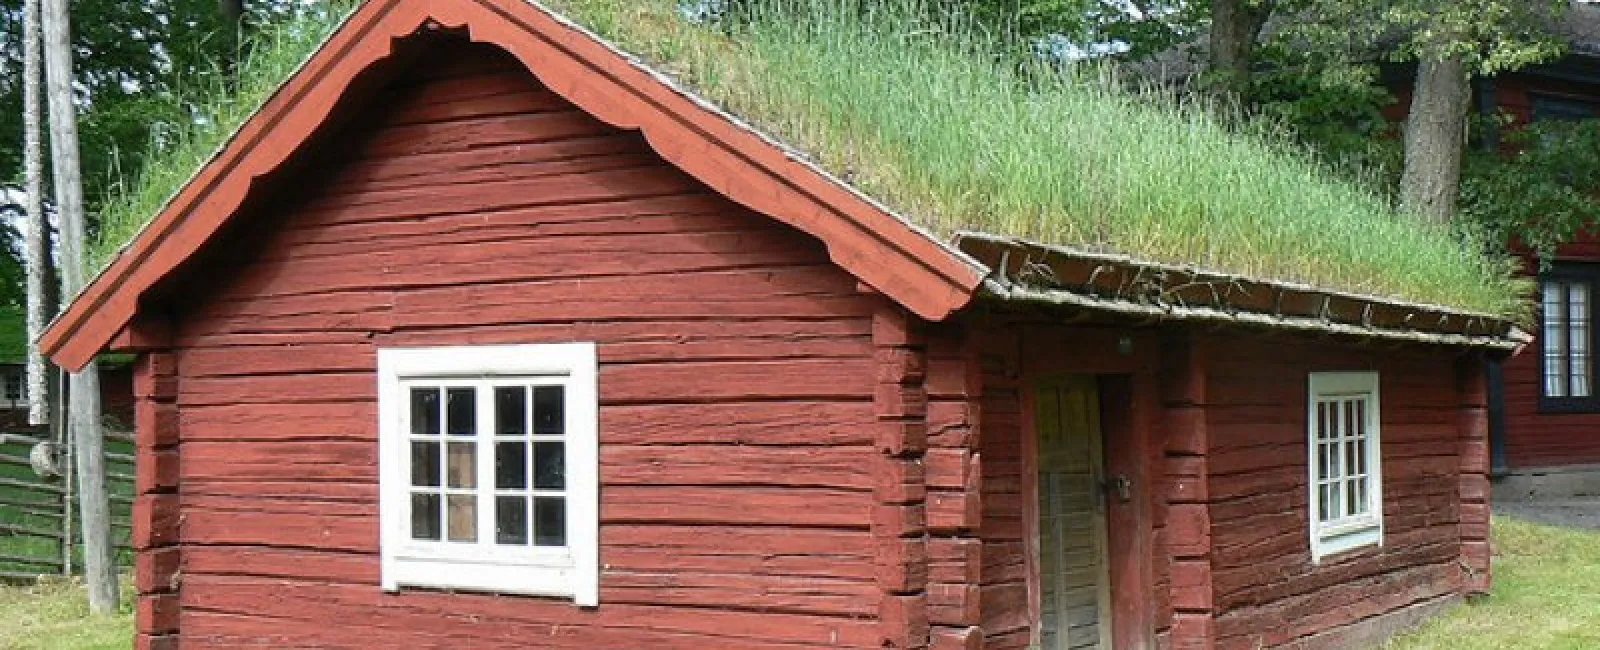 Top 10 Green Roofing Options for Your Home